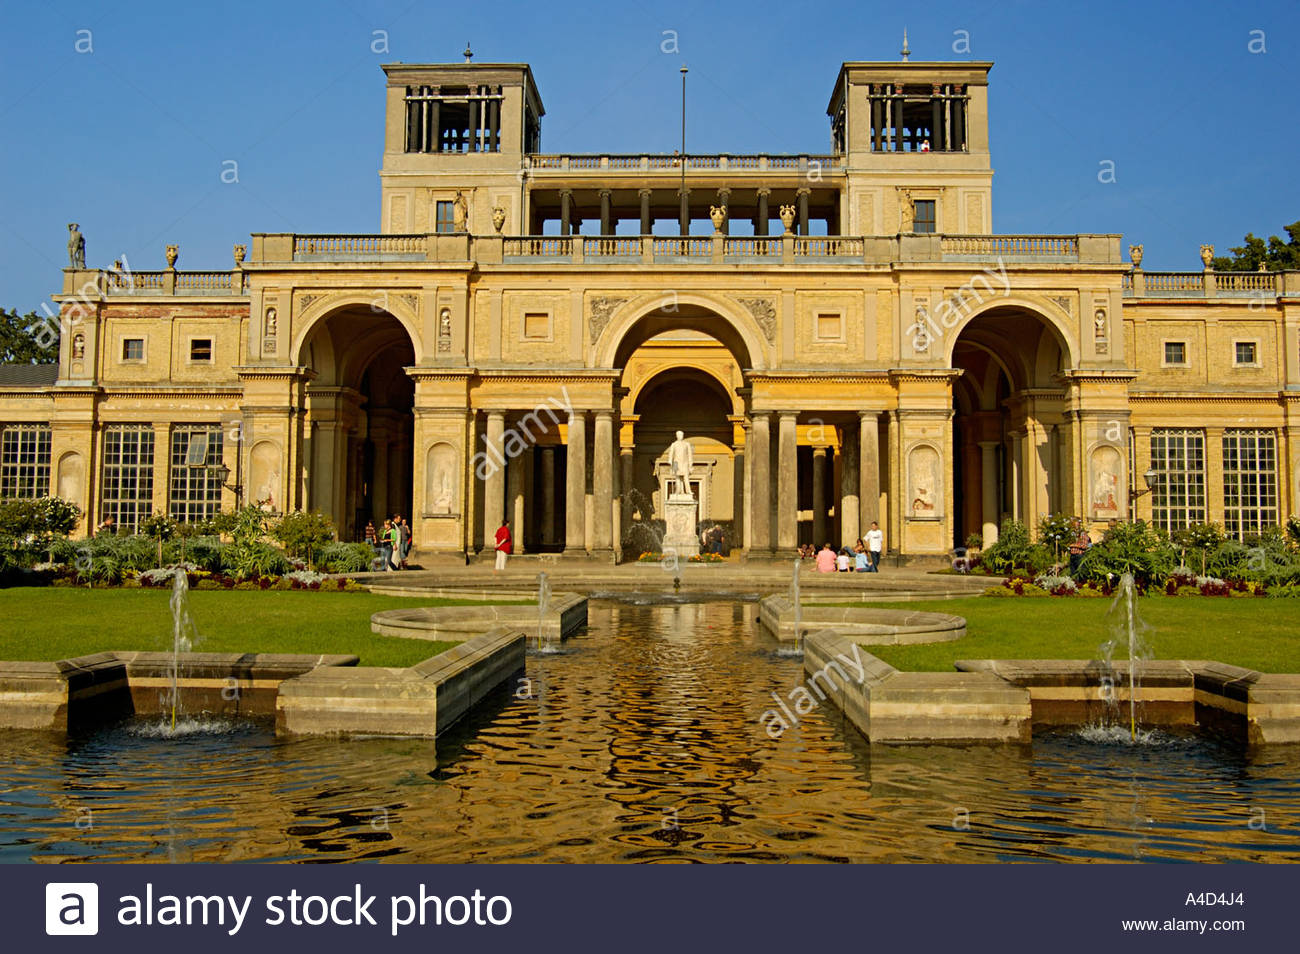 Nice Images Collection: Orangery Palace Desktop Wallpapers